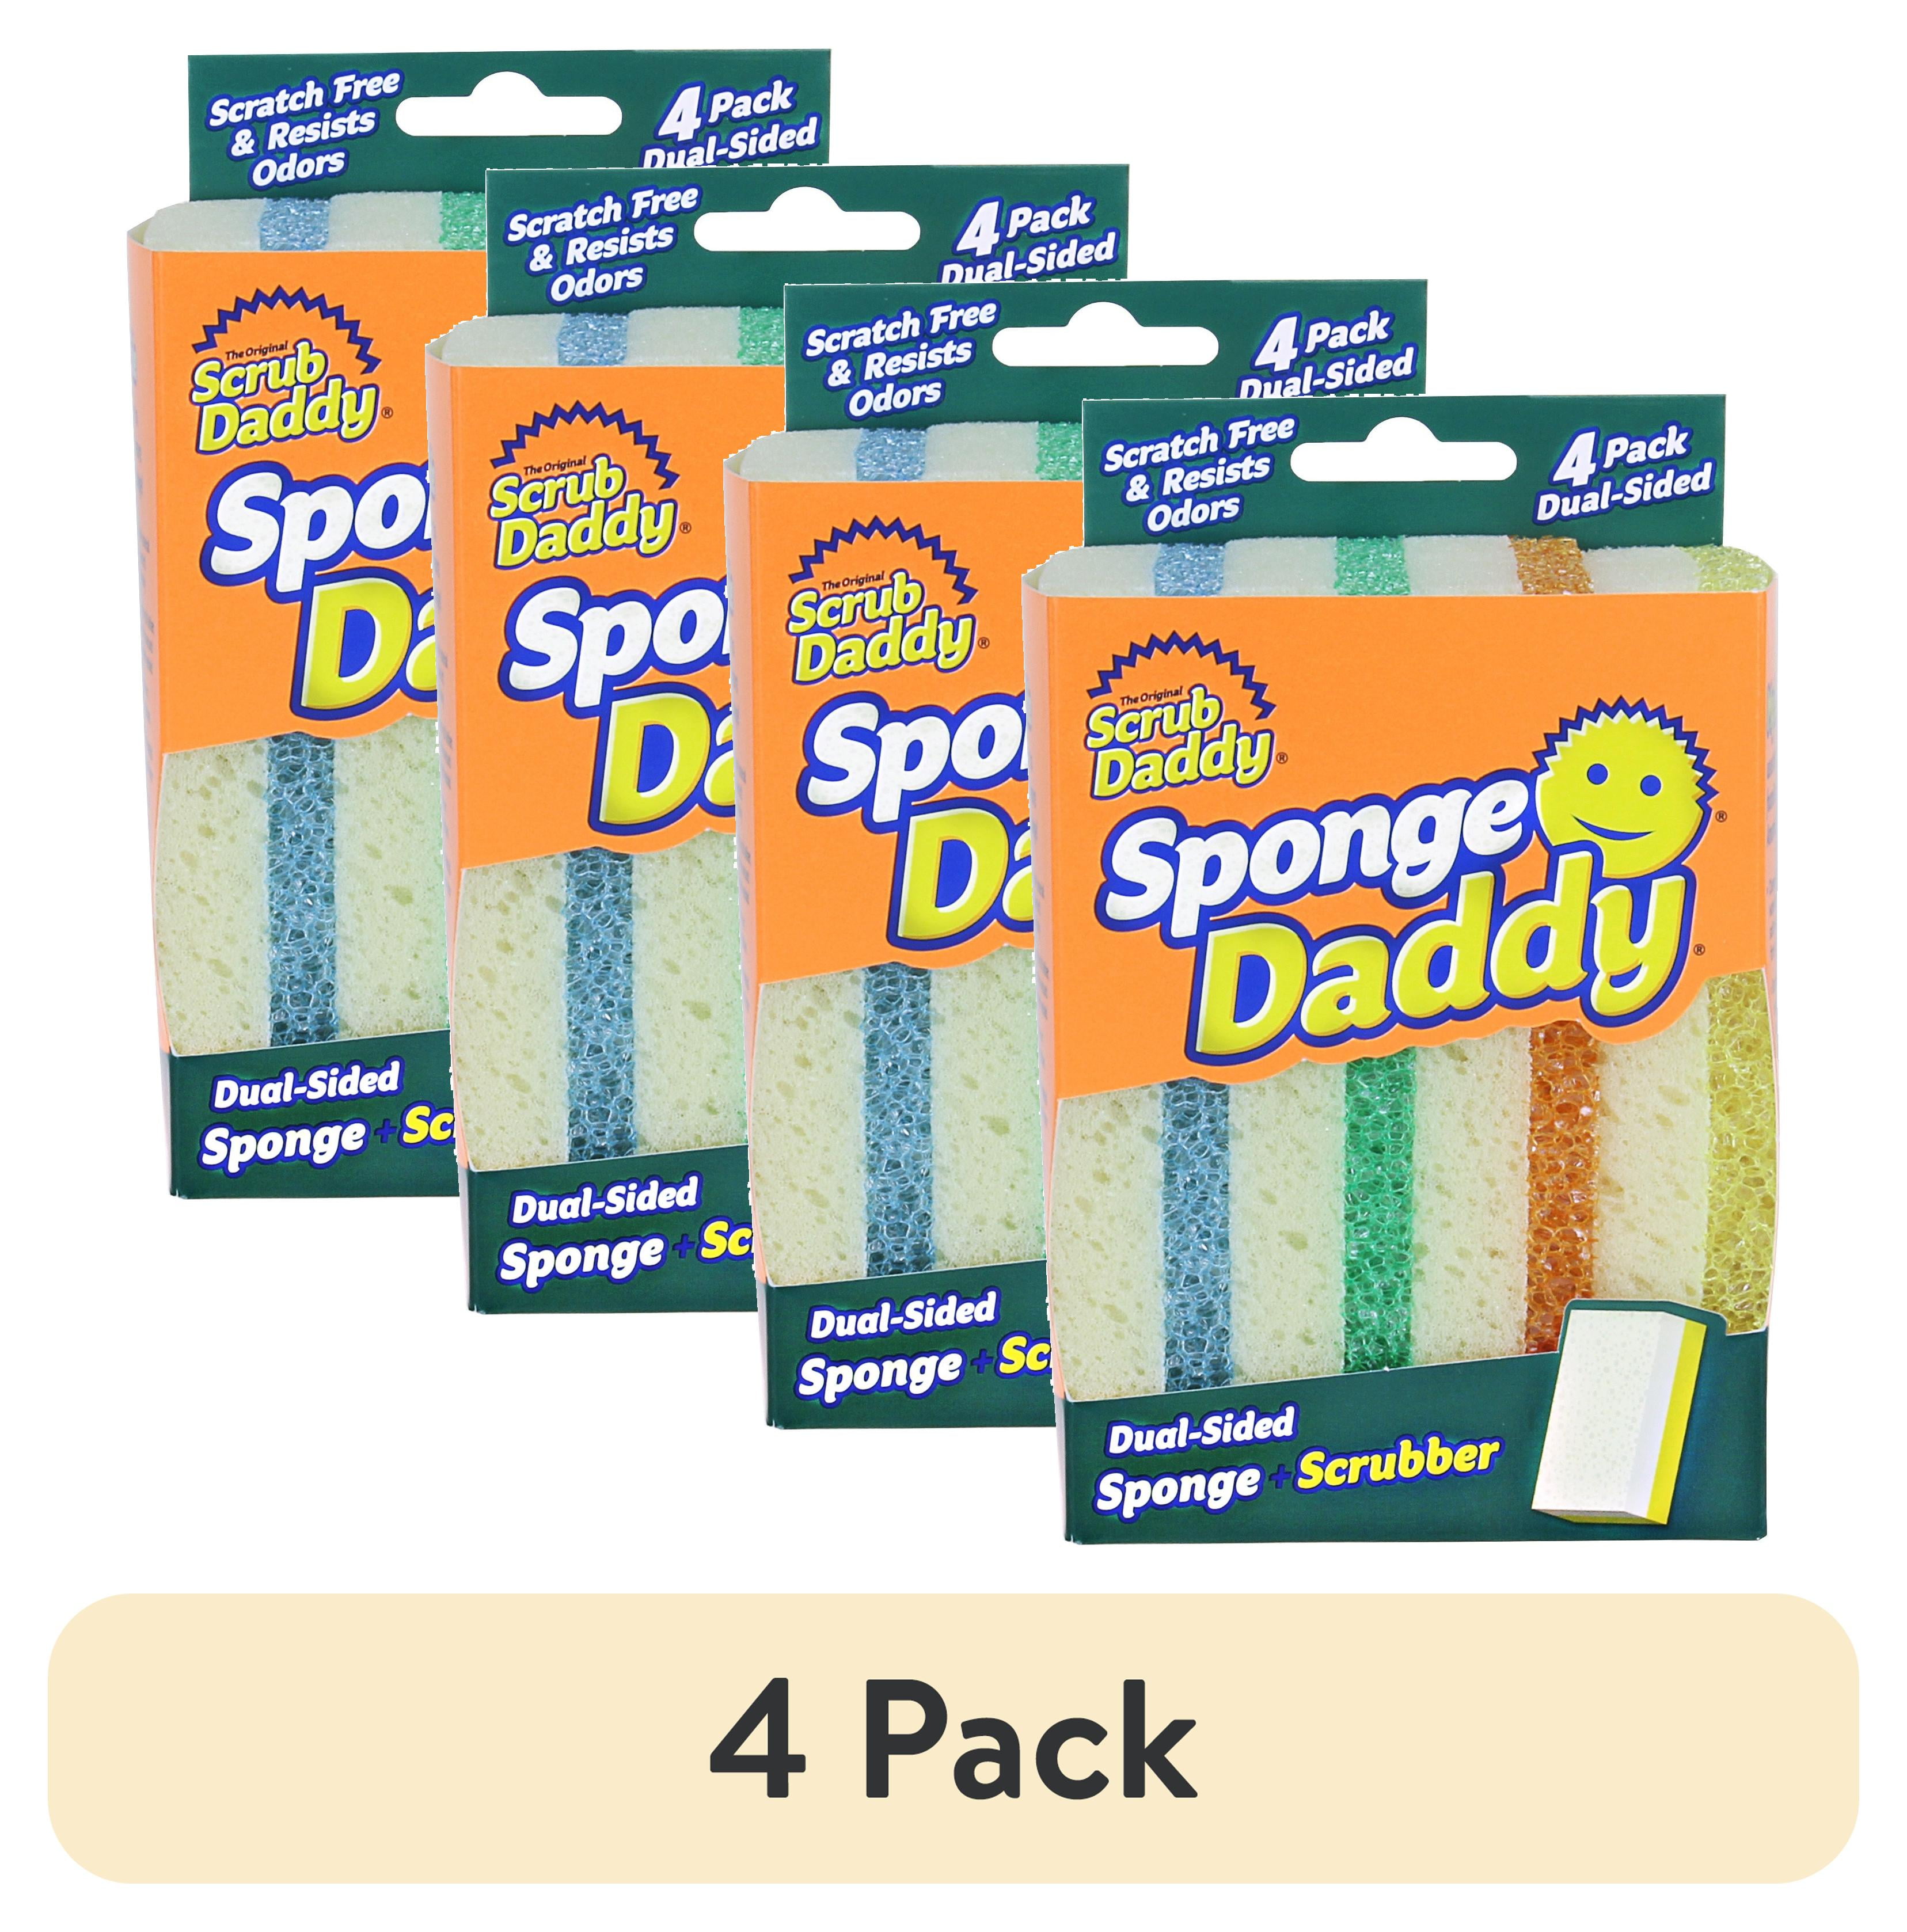 4 pack) Scrub Daddy Sponge Daddy Dual-Sided Non- Scratch Sponge, 4 Count